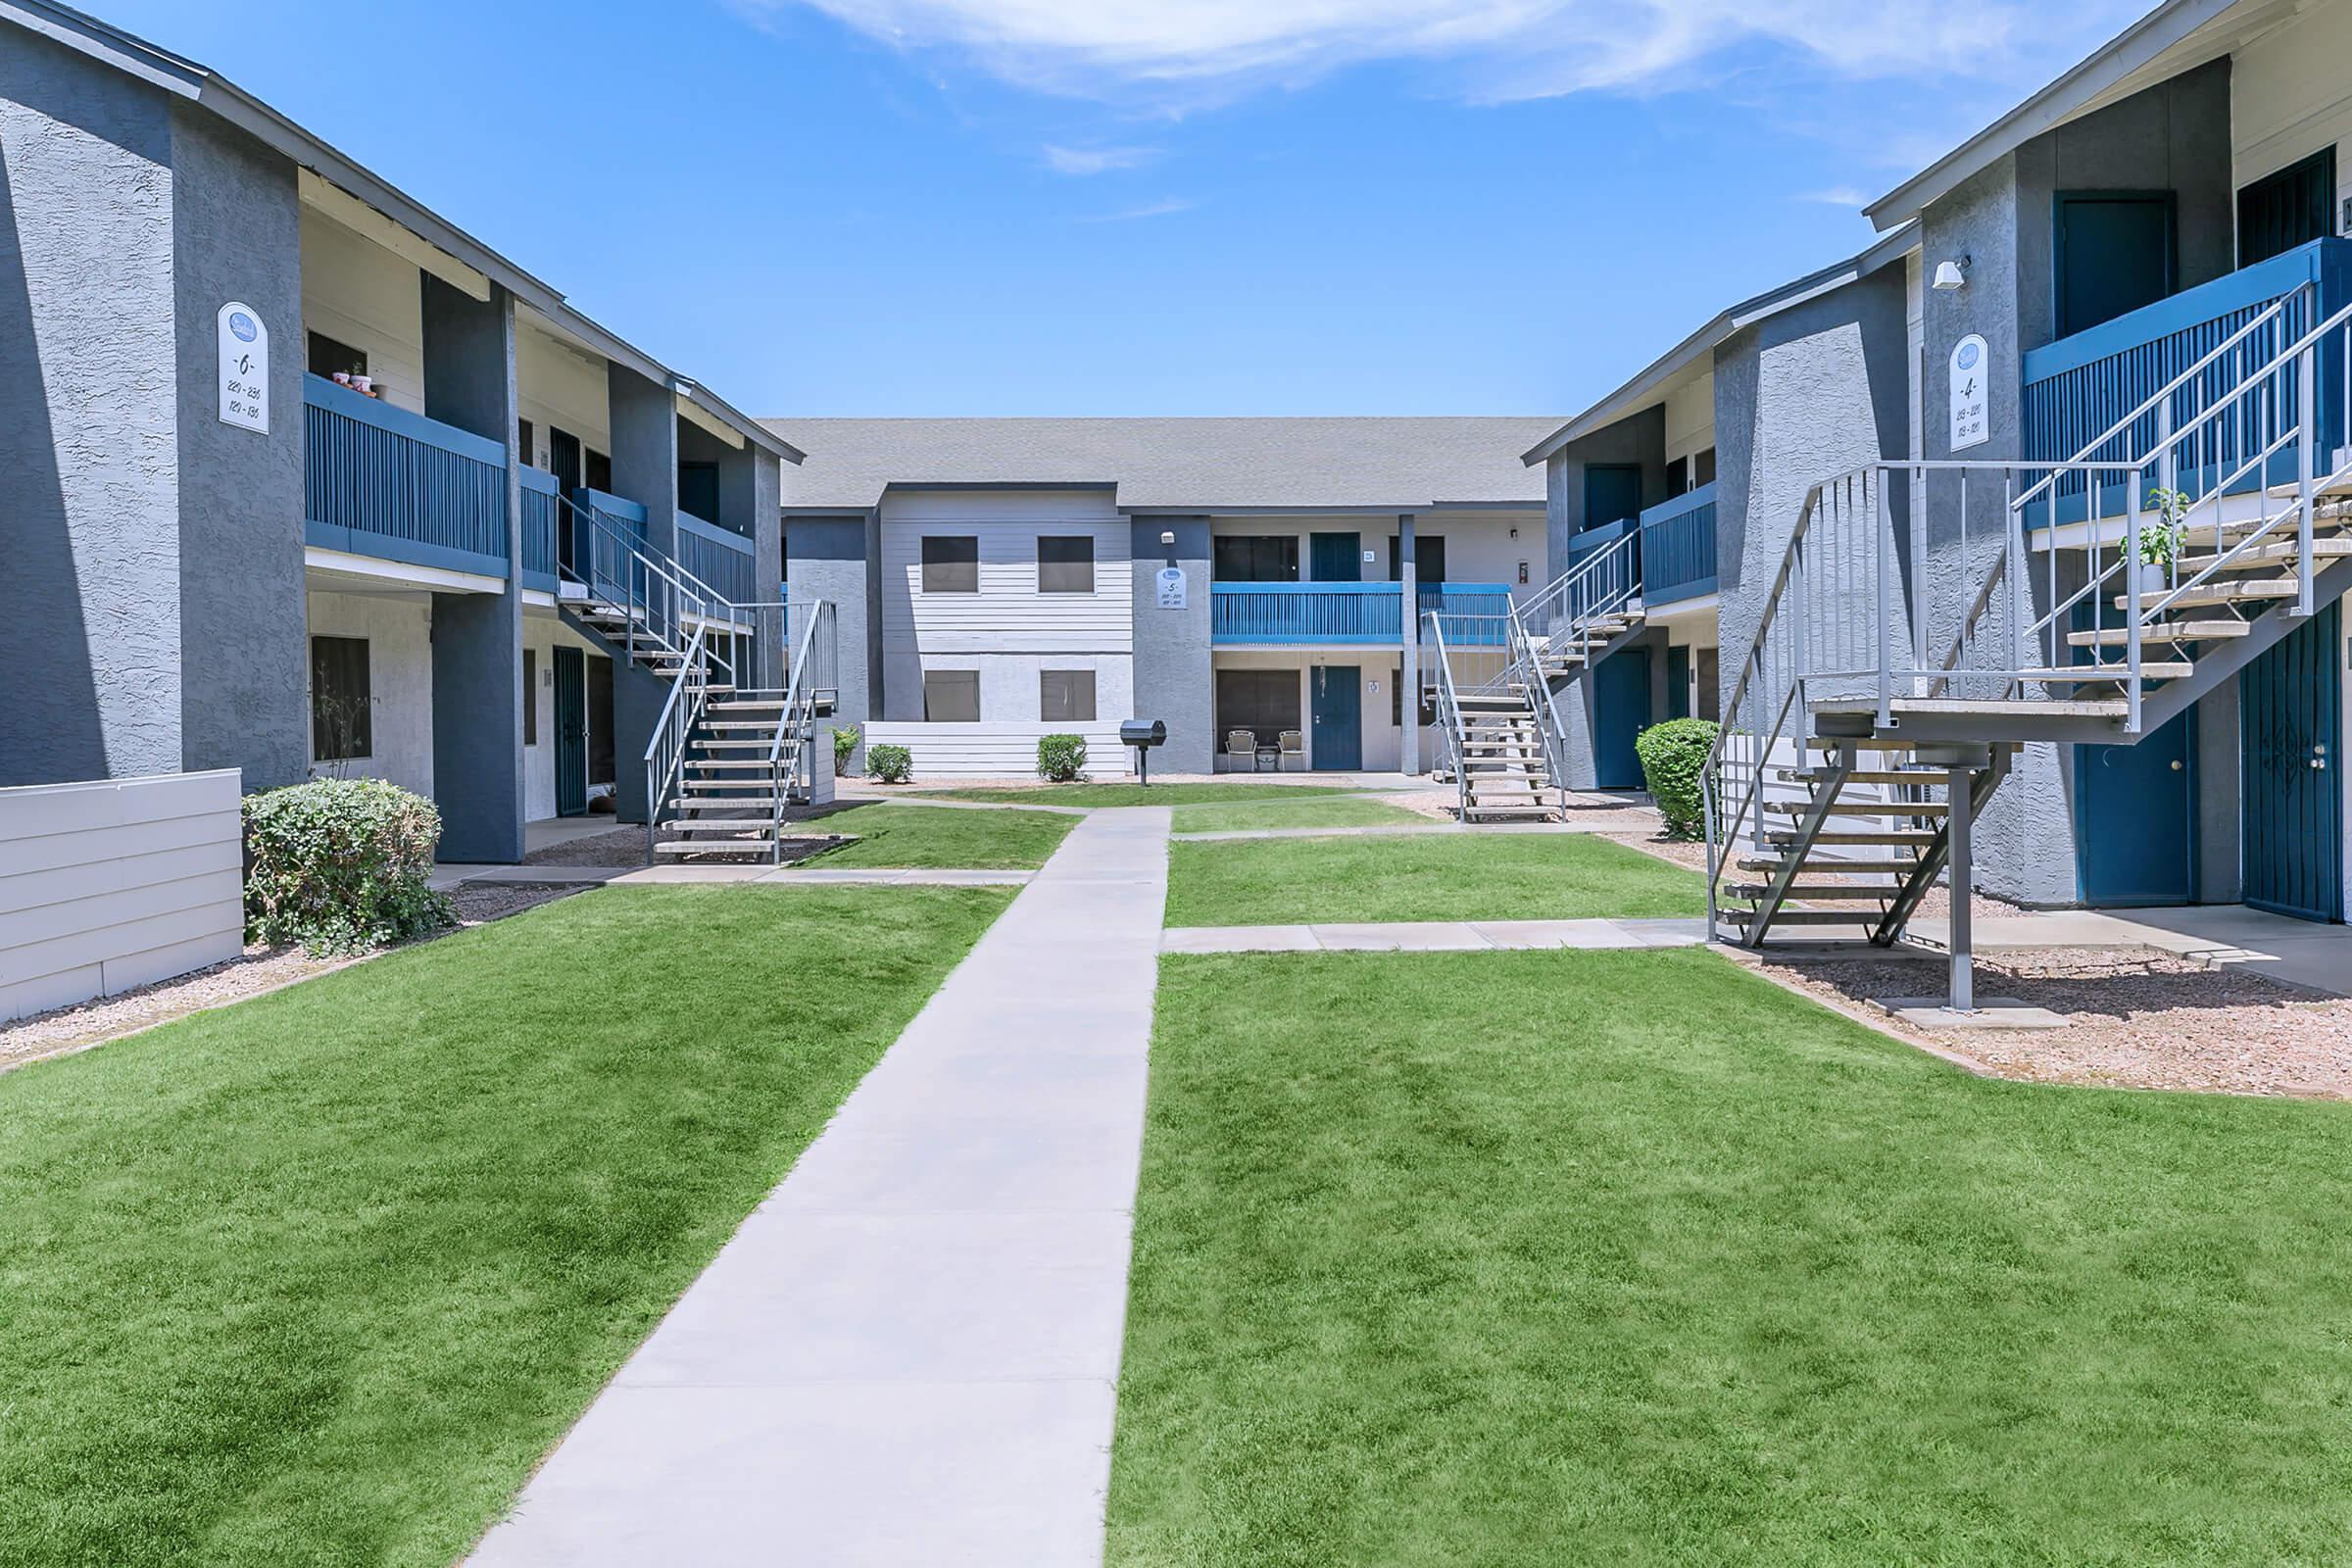 A landscaped pathway in between the apartments at Rise Northridge.